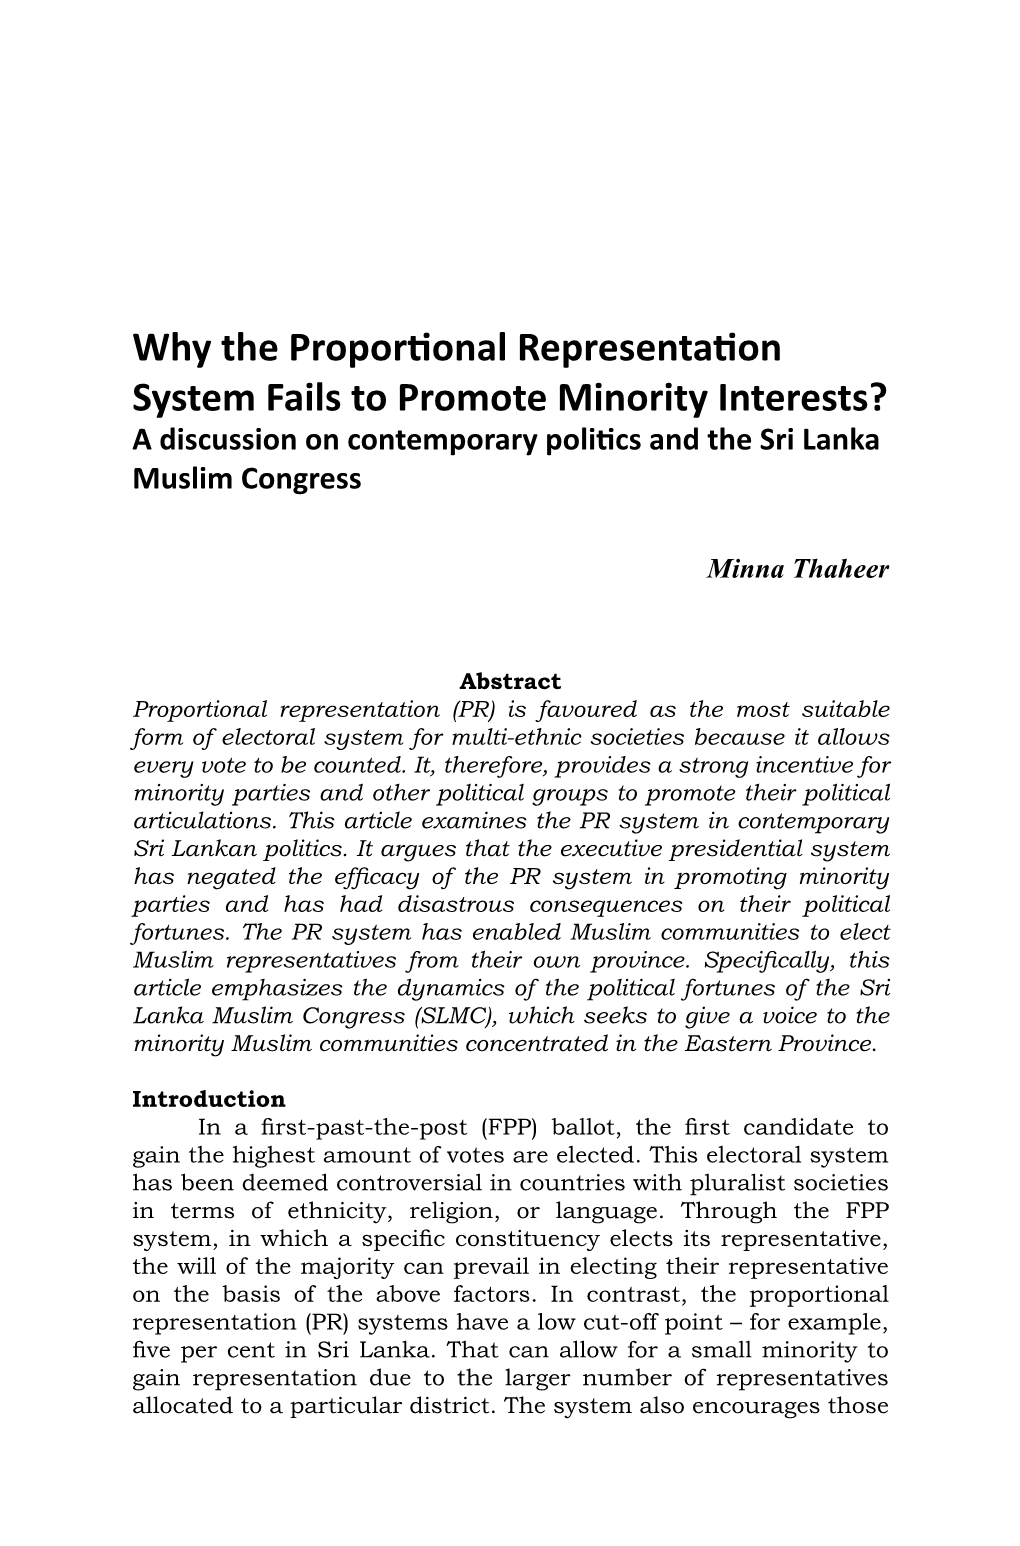 Why the Proportional Representation System Fails to Promote Minority Interests? a Discussion on Contemporary Politics and the Sri Lanka Muslim Congress